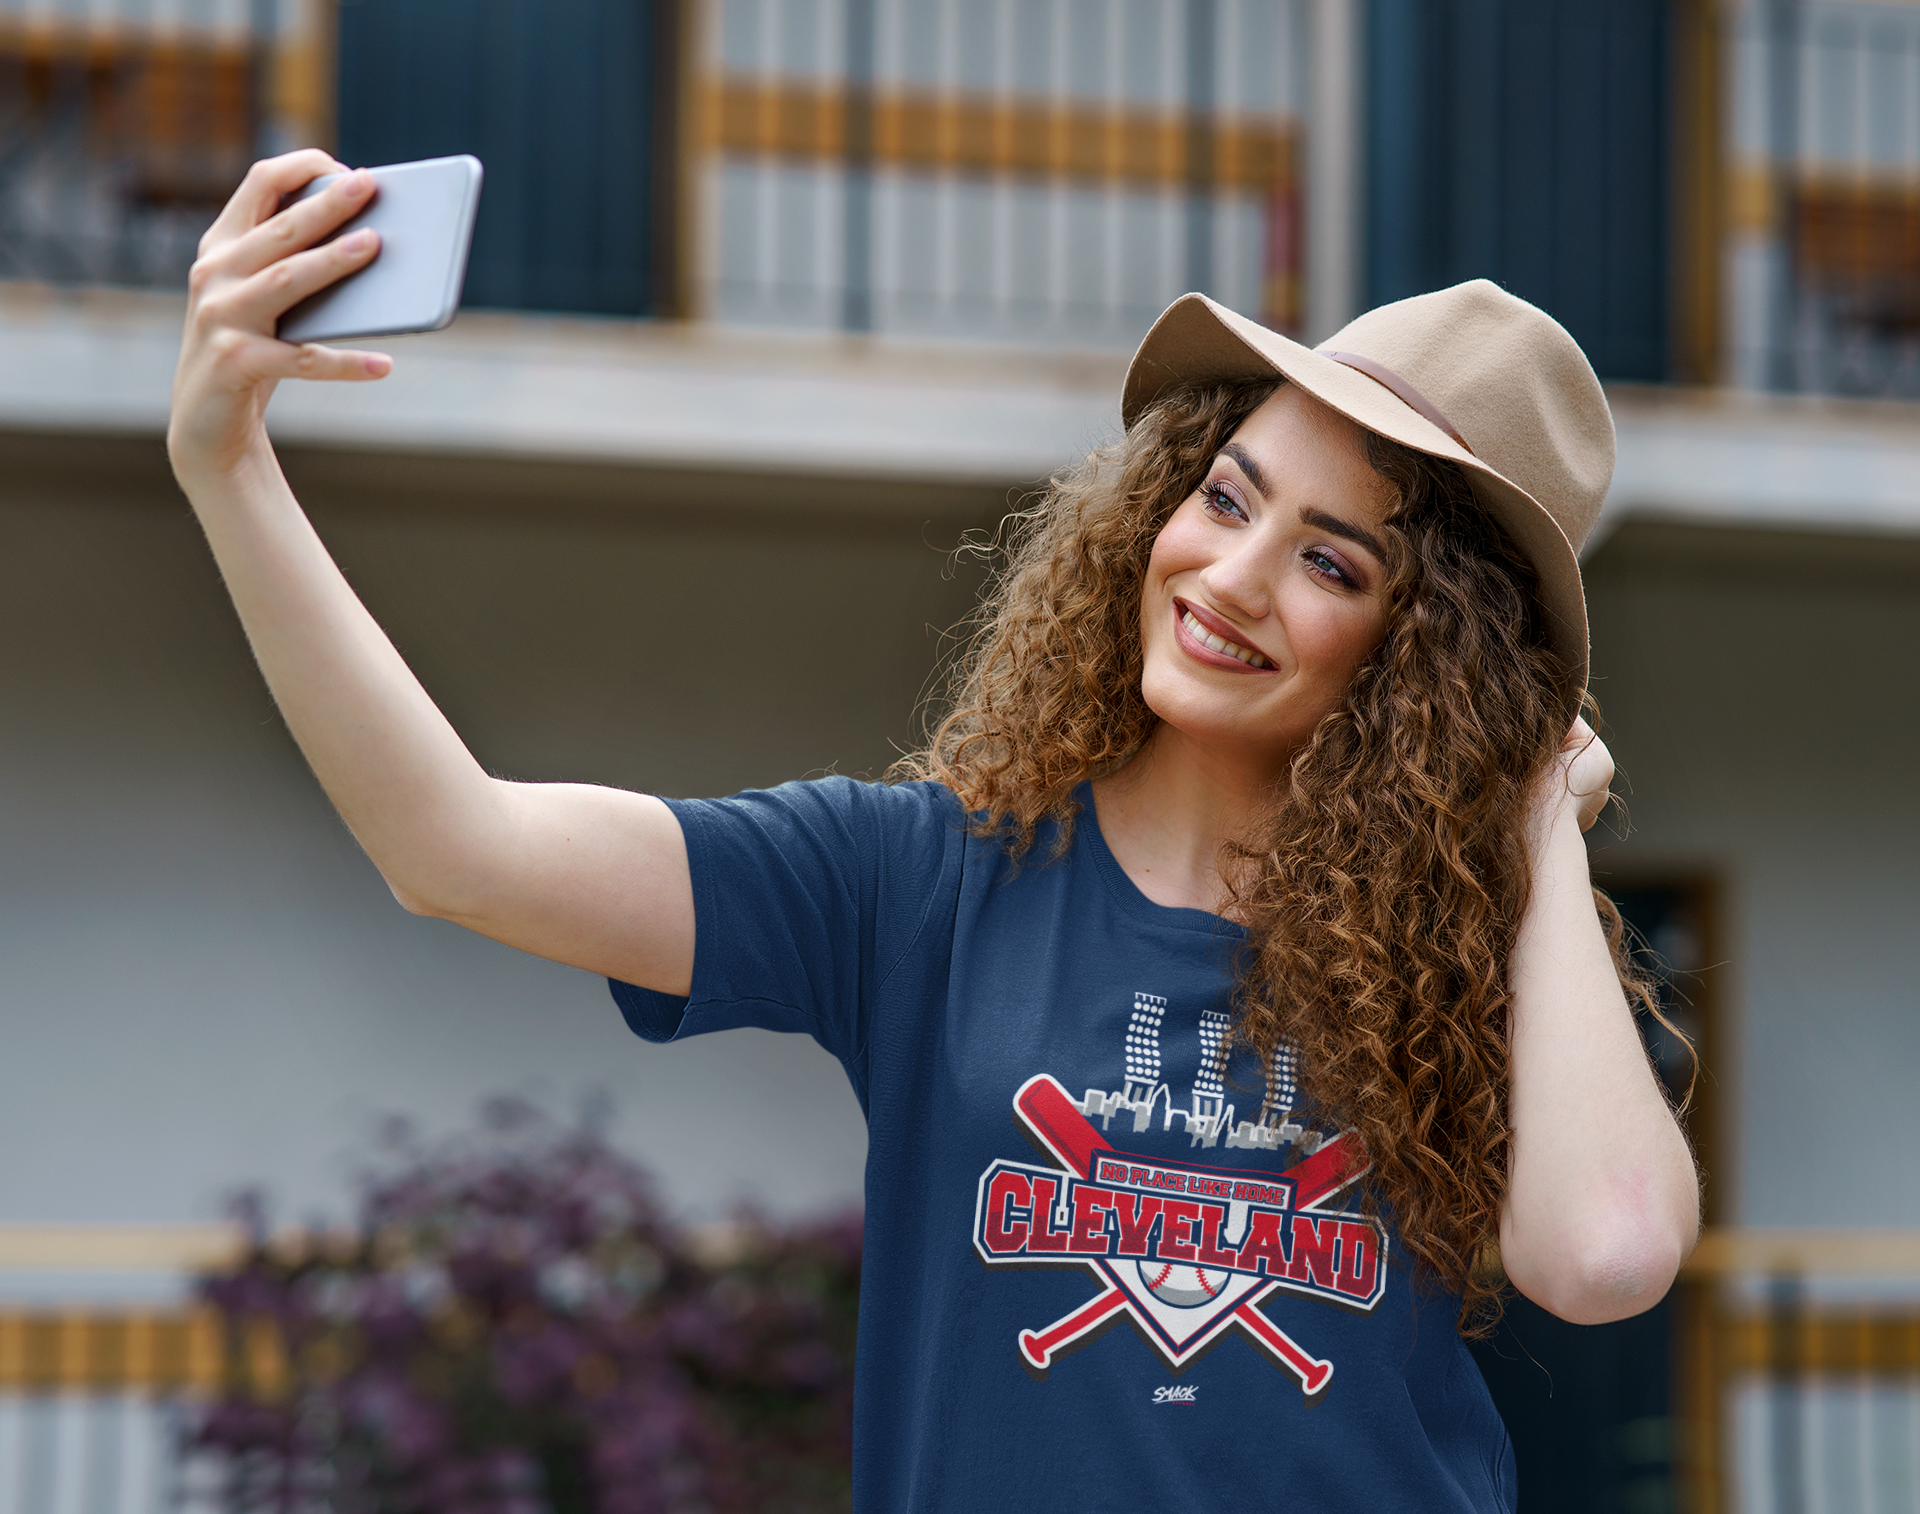 No Place Like Home T-Shirt for Cleveland Baseball Fans